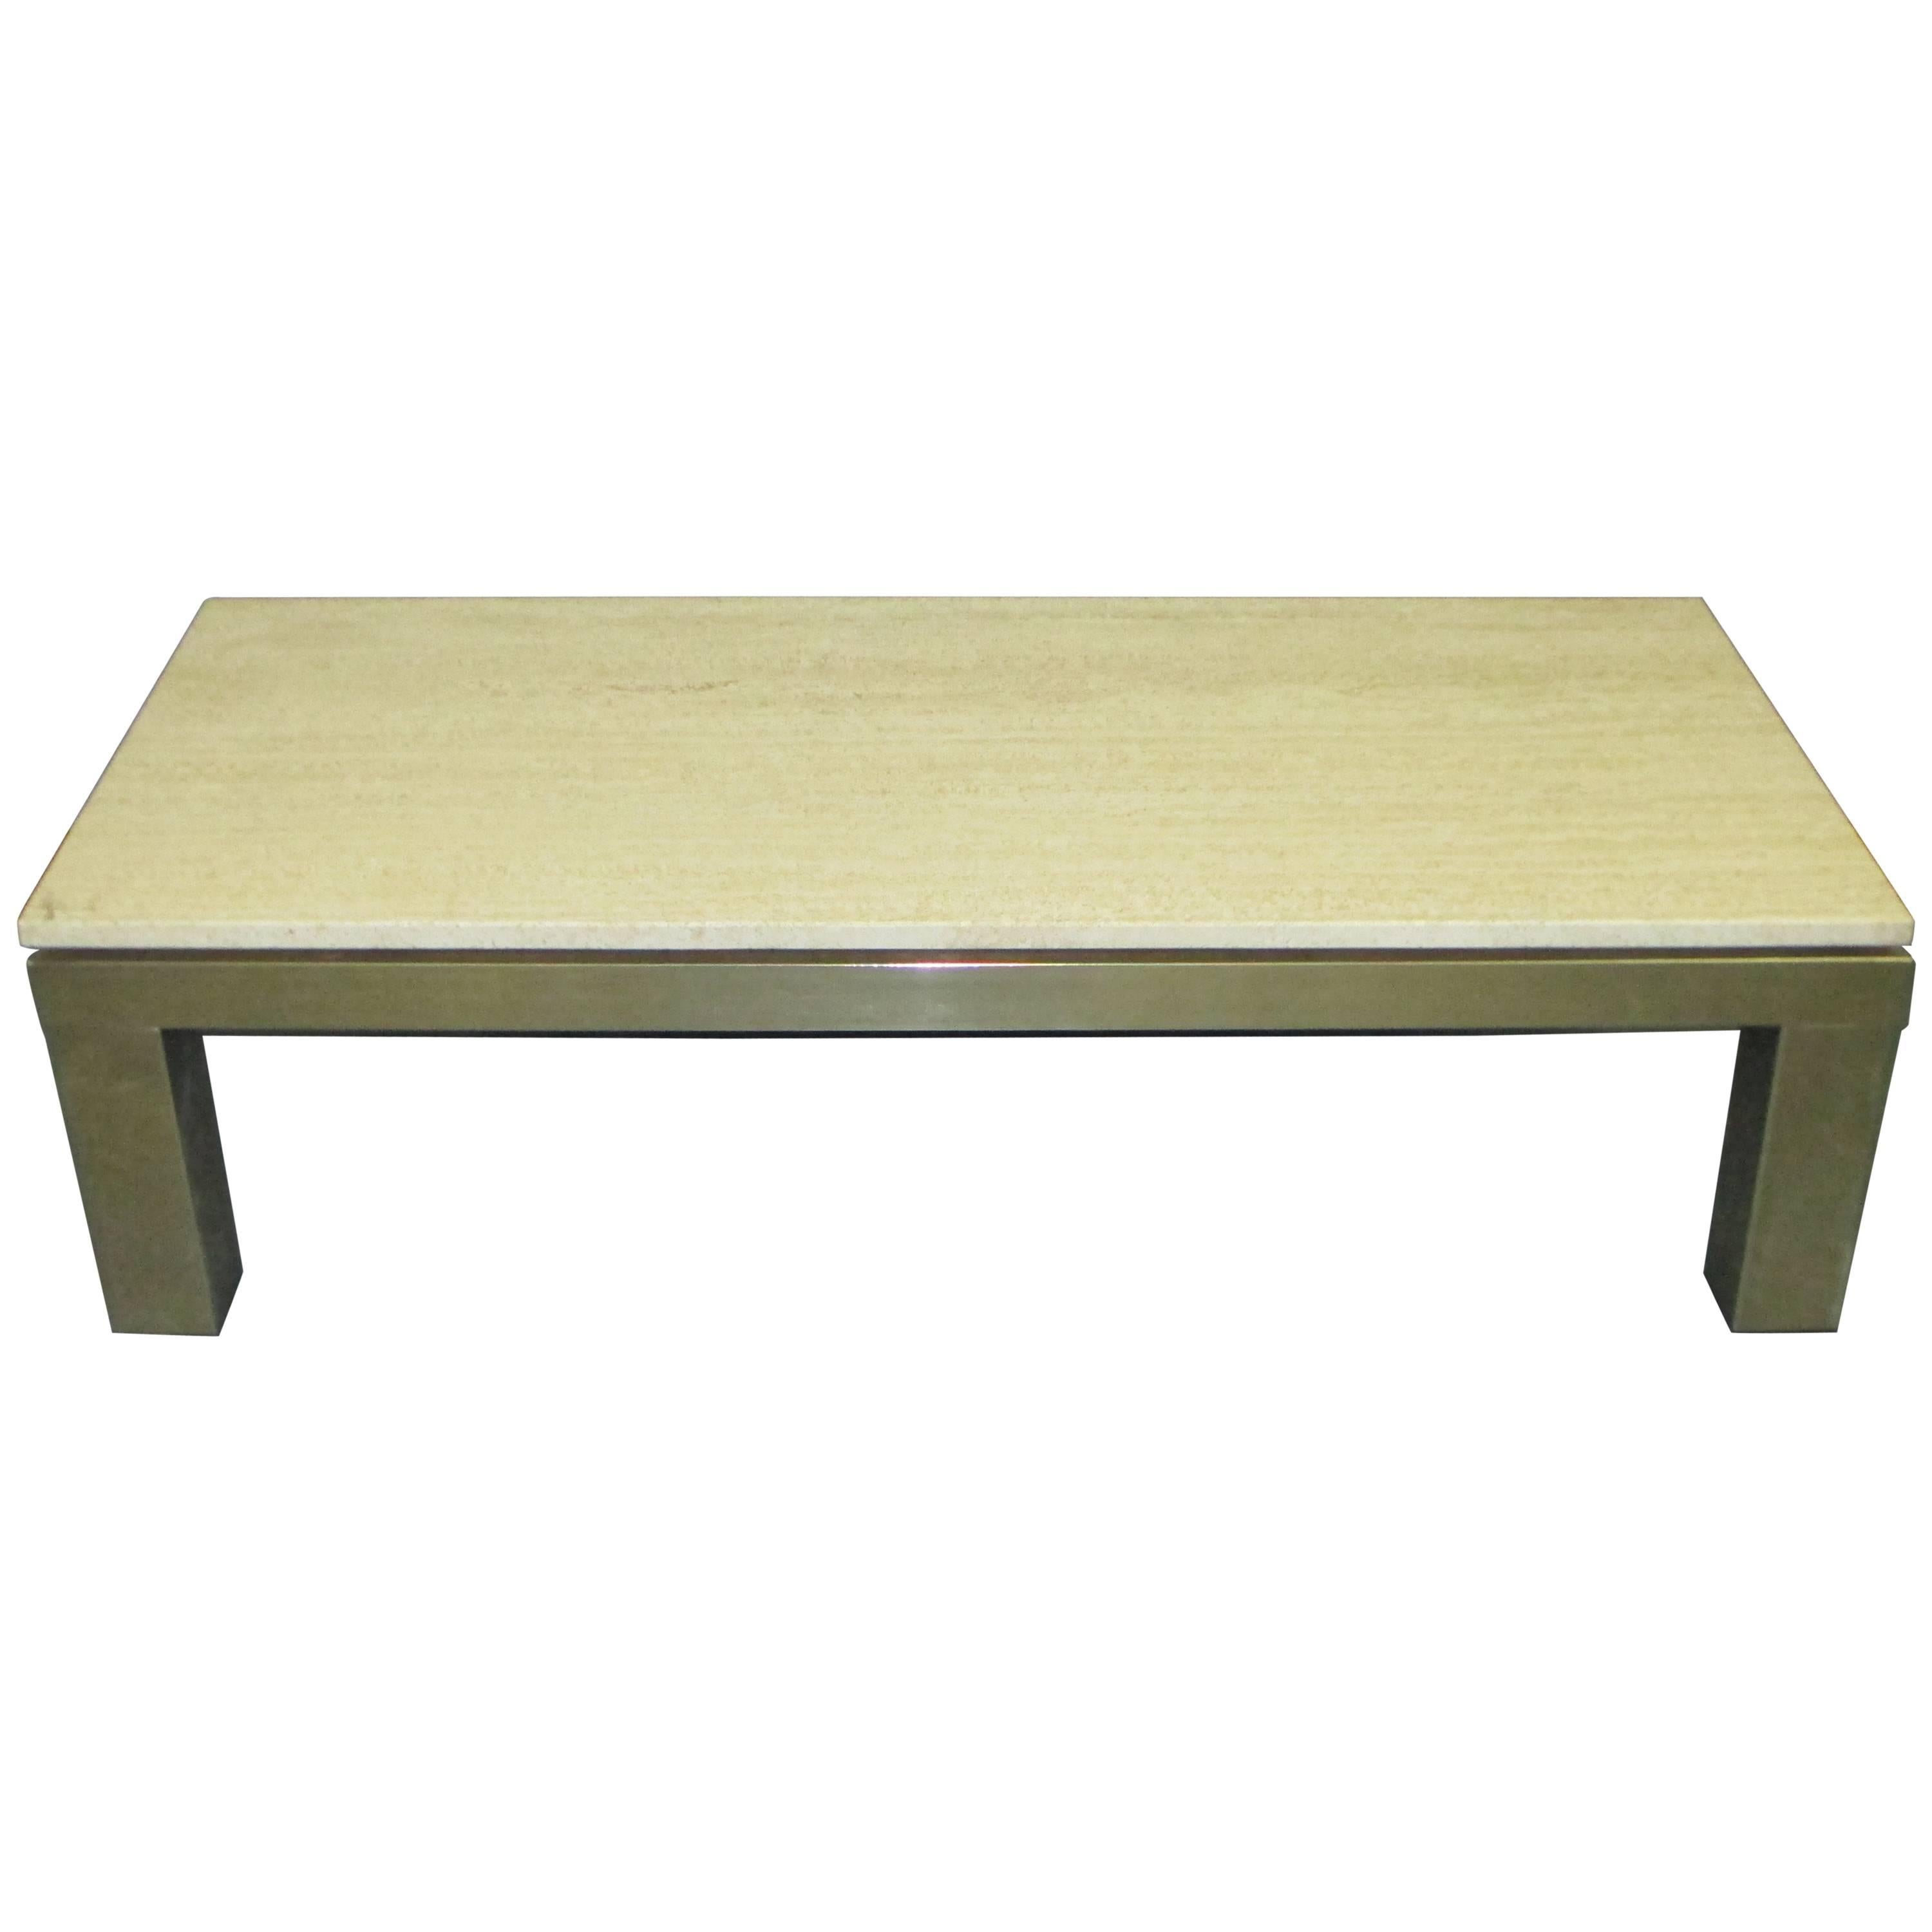 French Mid-Century Modern Travertine-Top Coffee Table on Brass Base